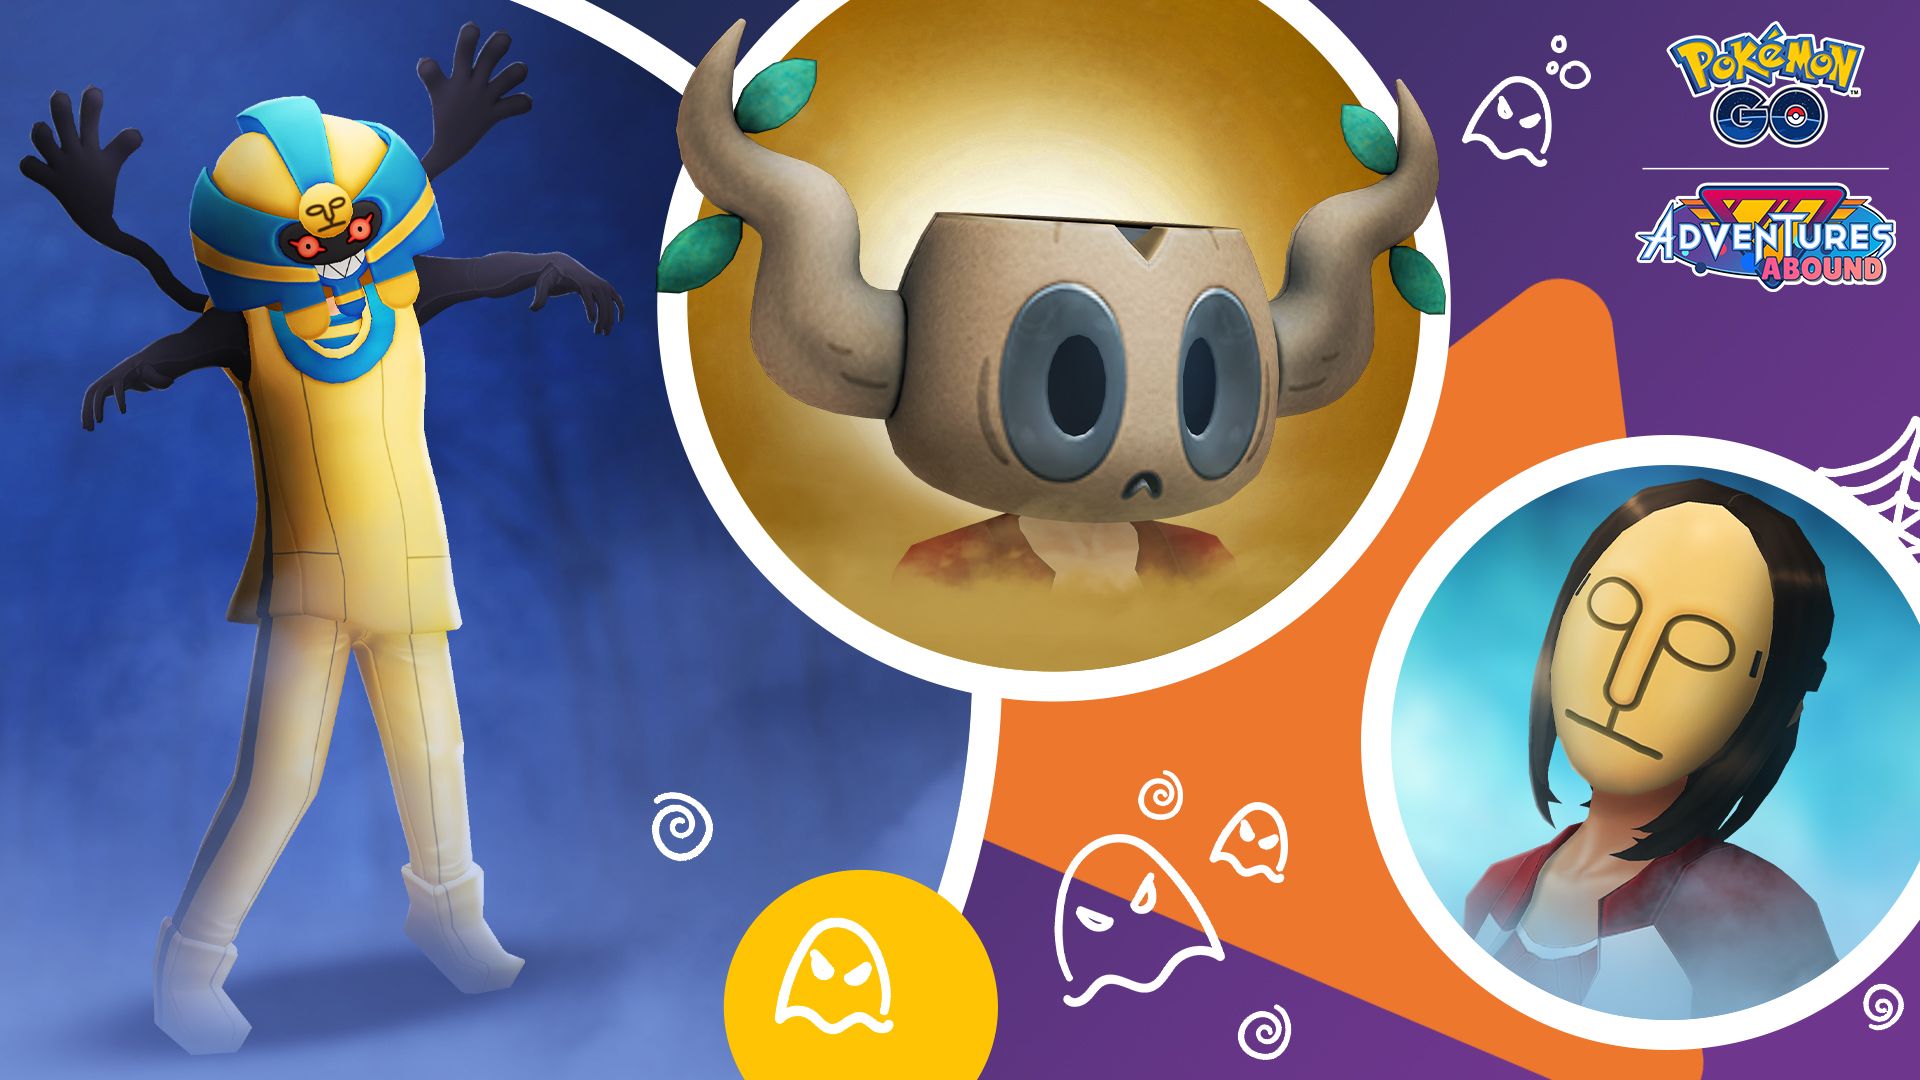 Images of three different Halloween-themed avatar items from Pokemon go